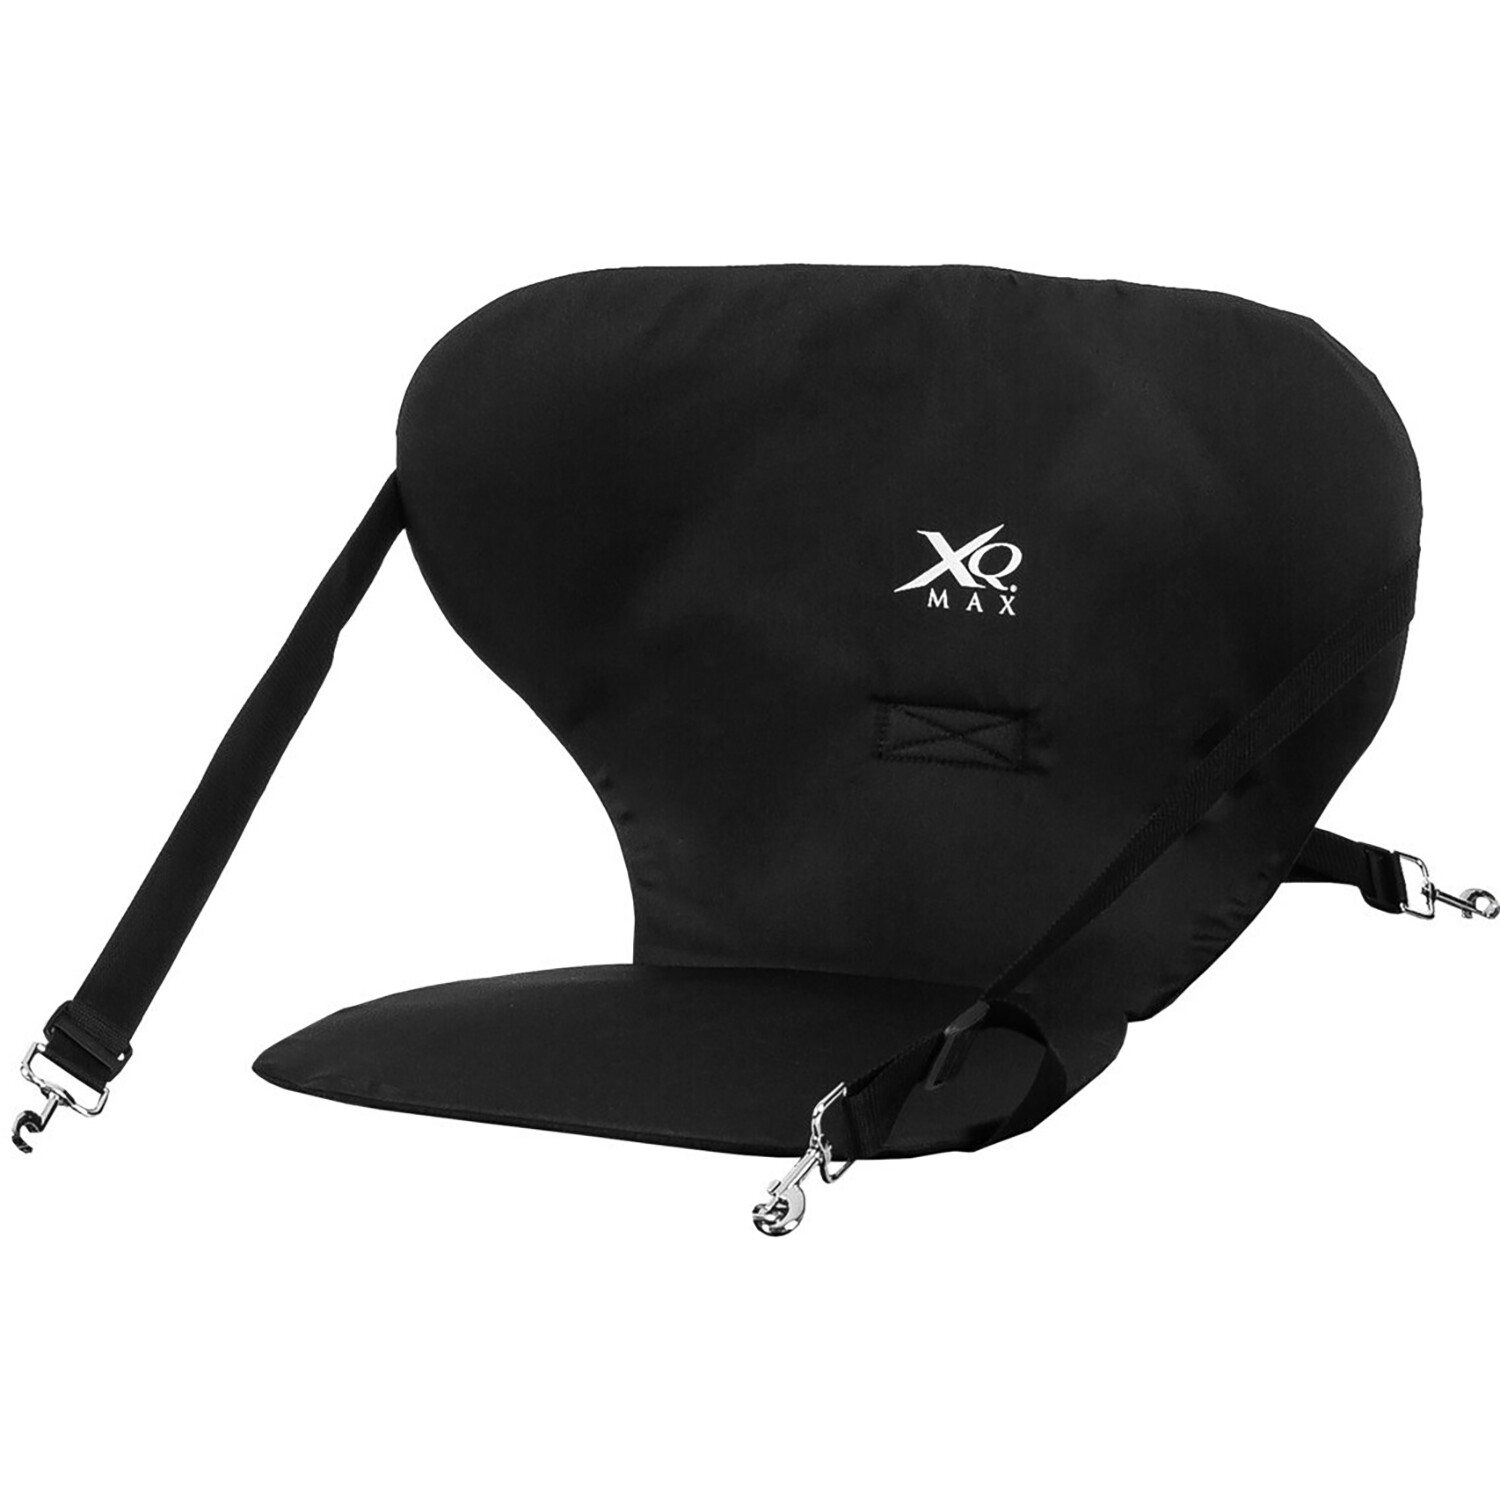 XQ Max Foldable Sup Chair Image